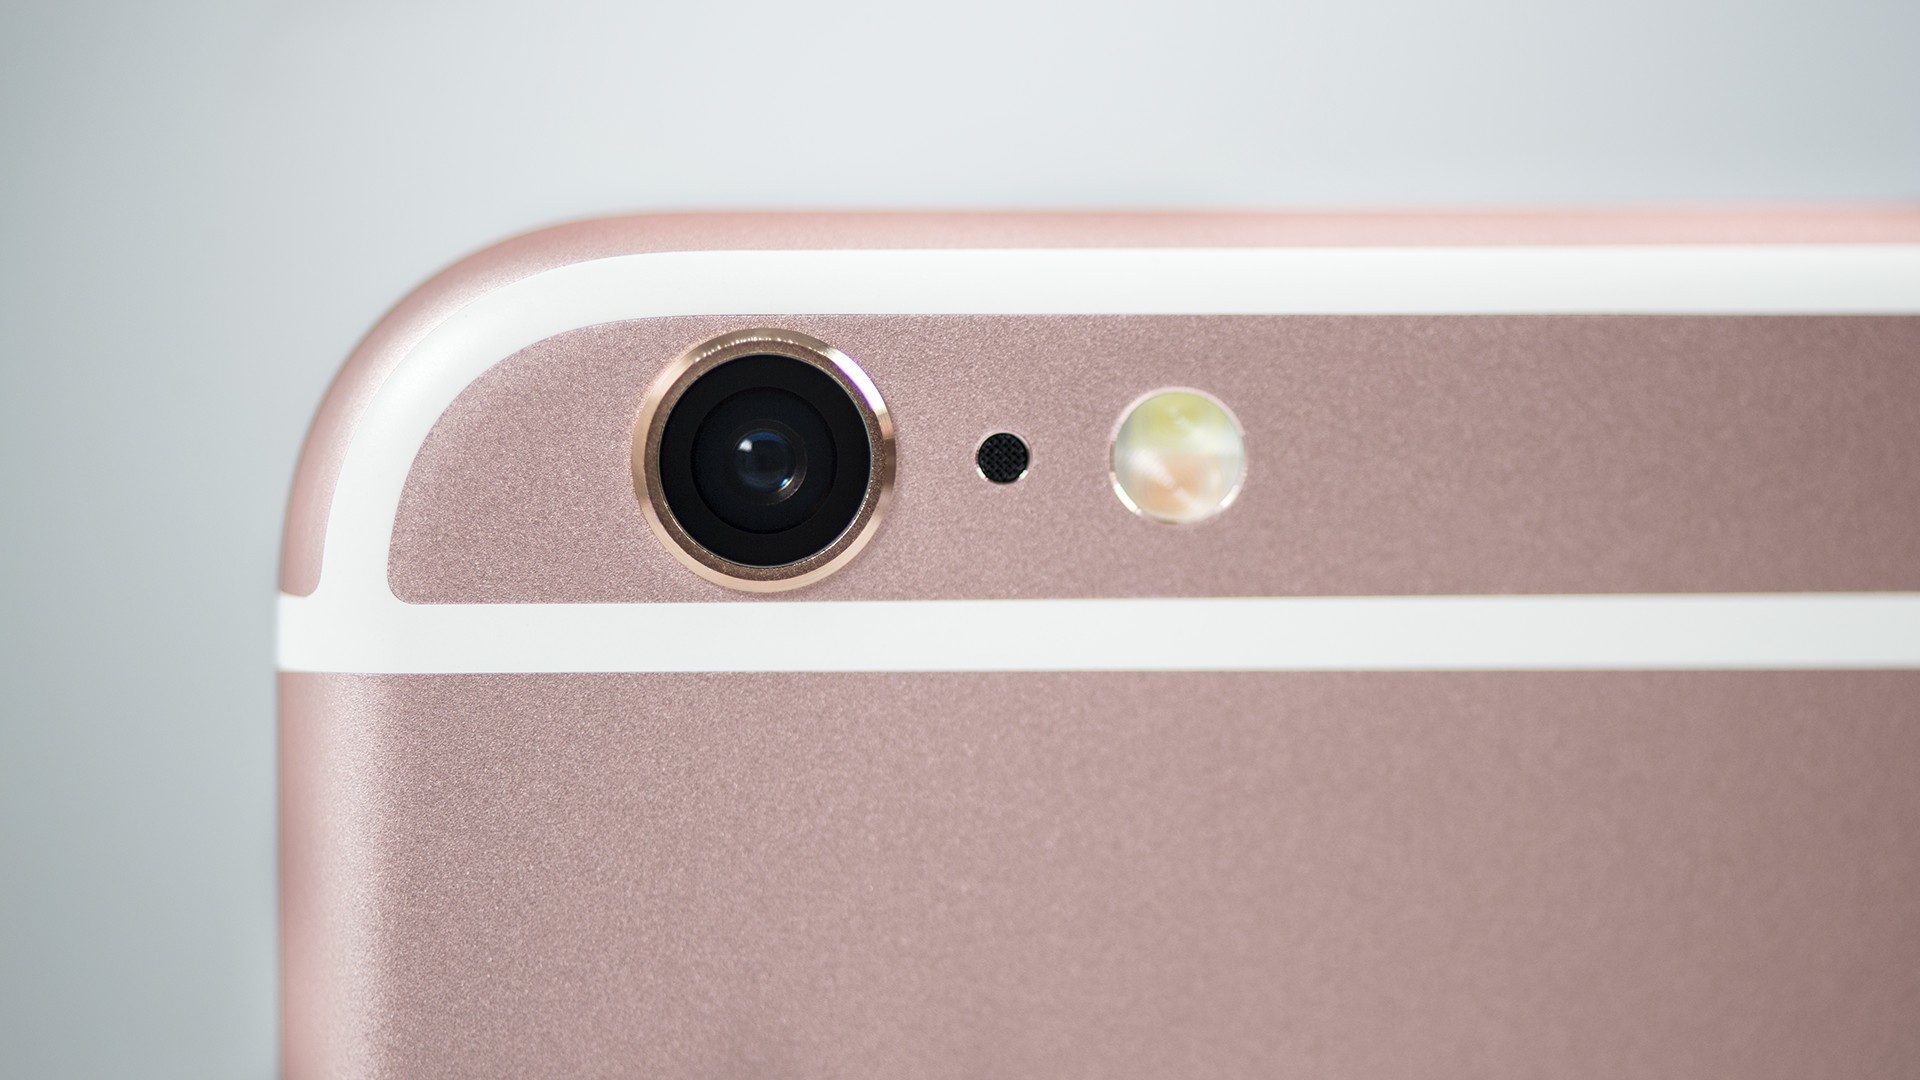 Iphone 7 Could Launch With Two Different Rear Cameras